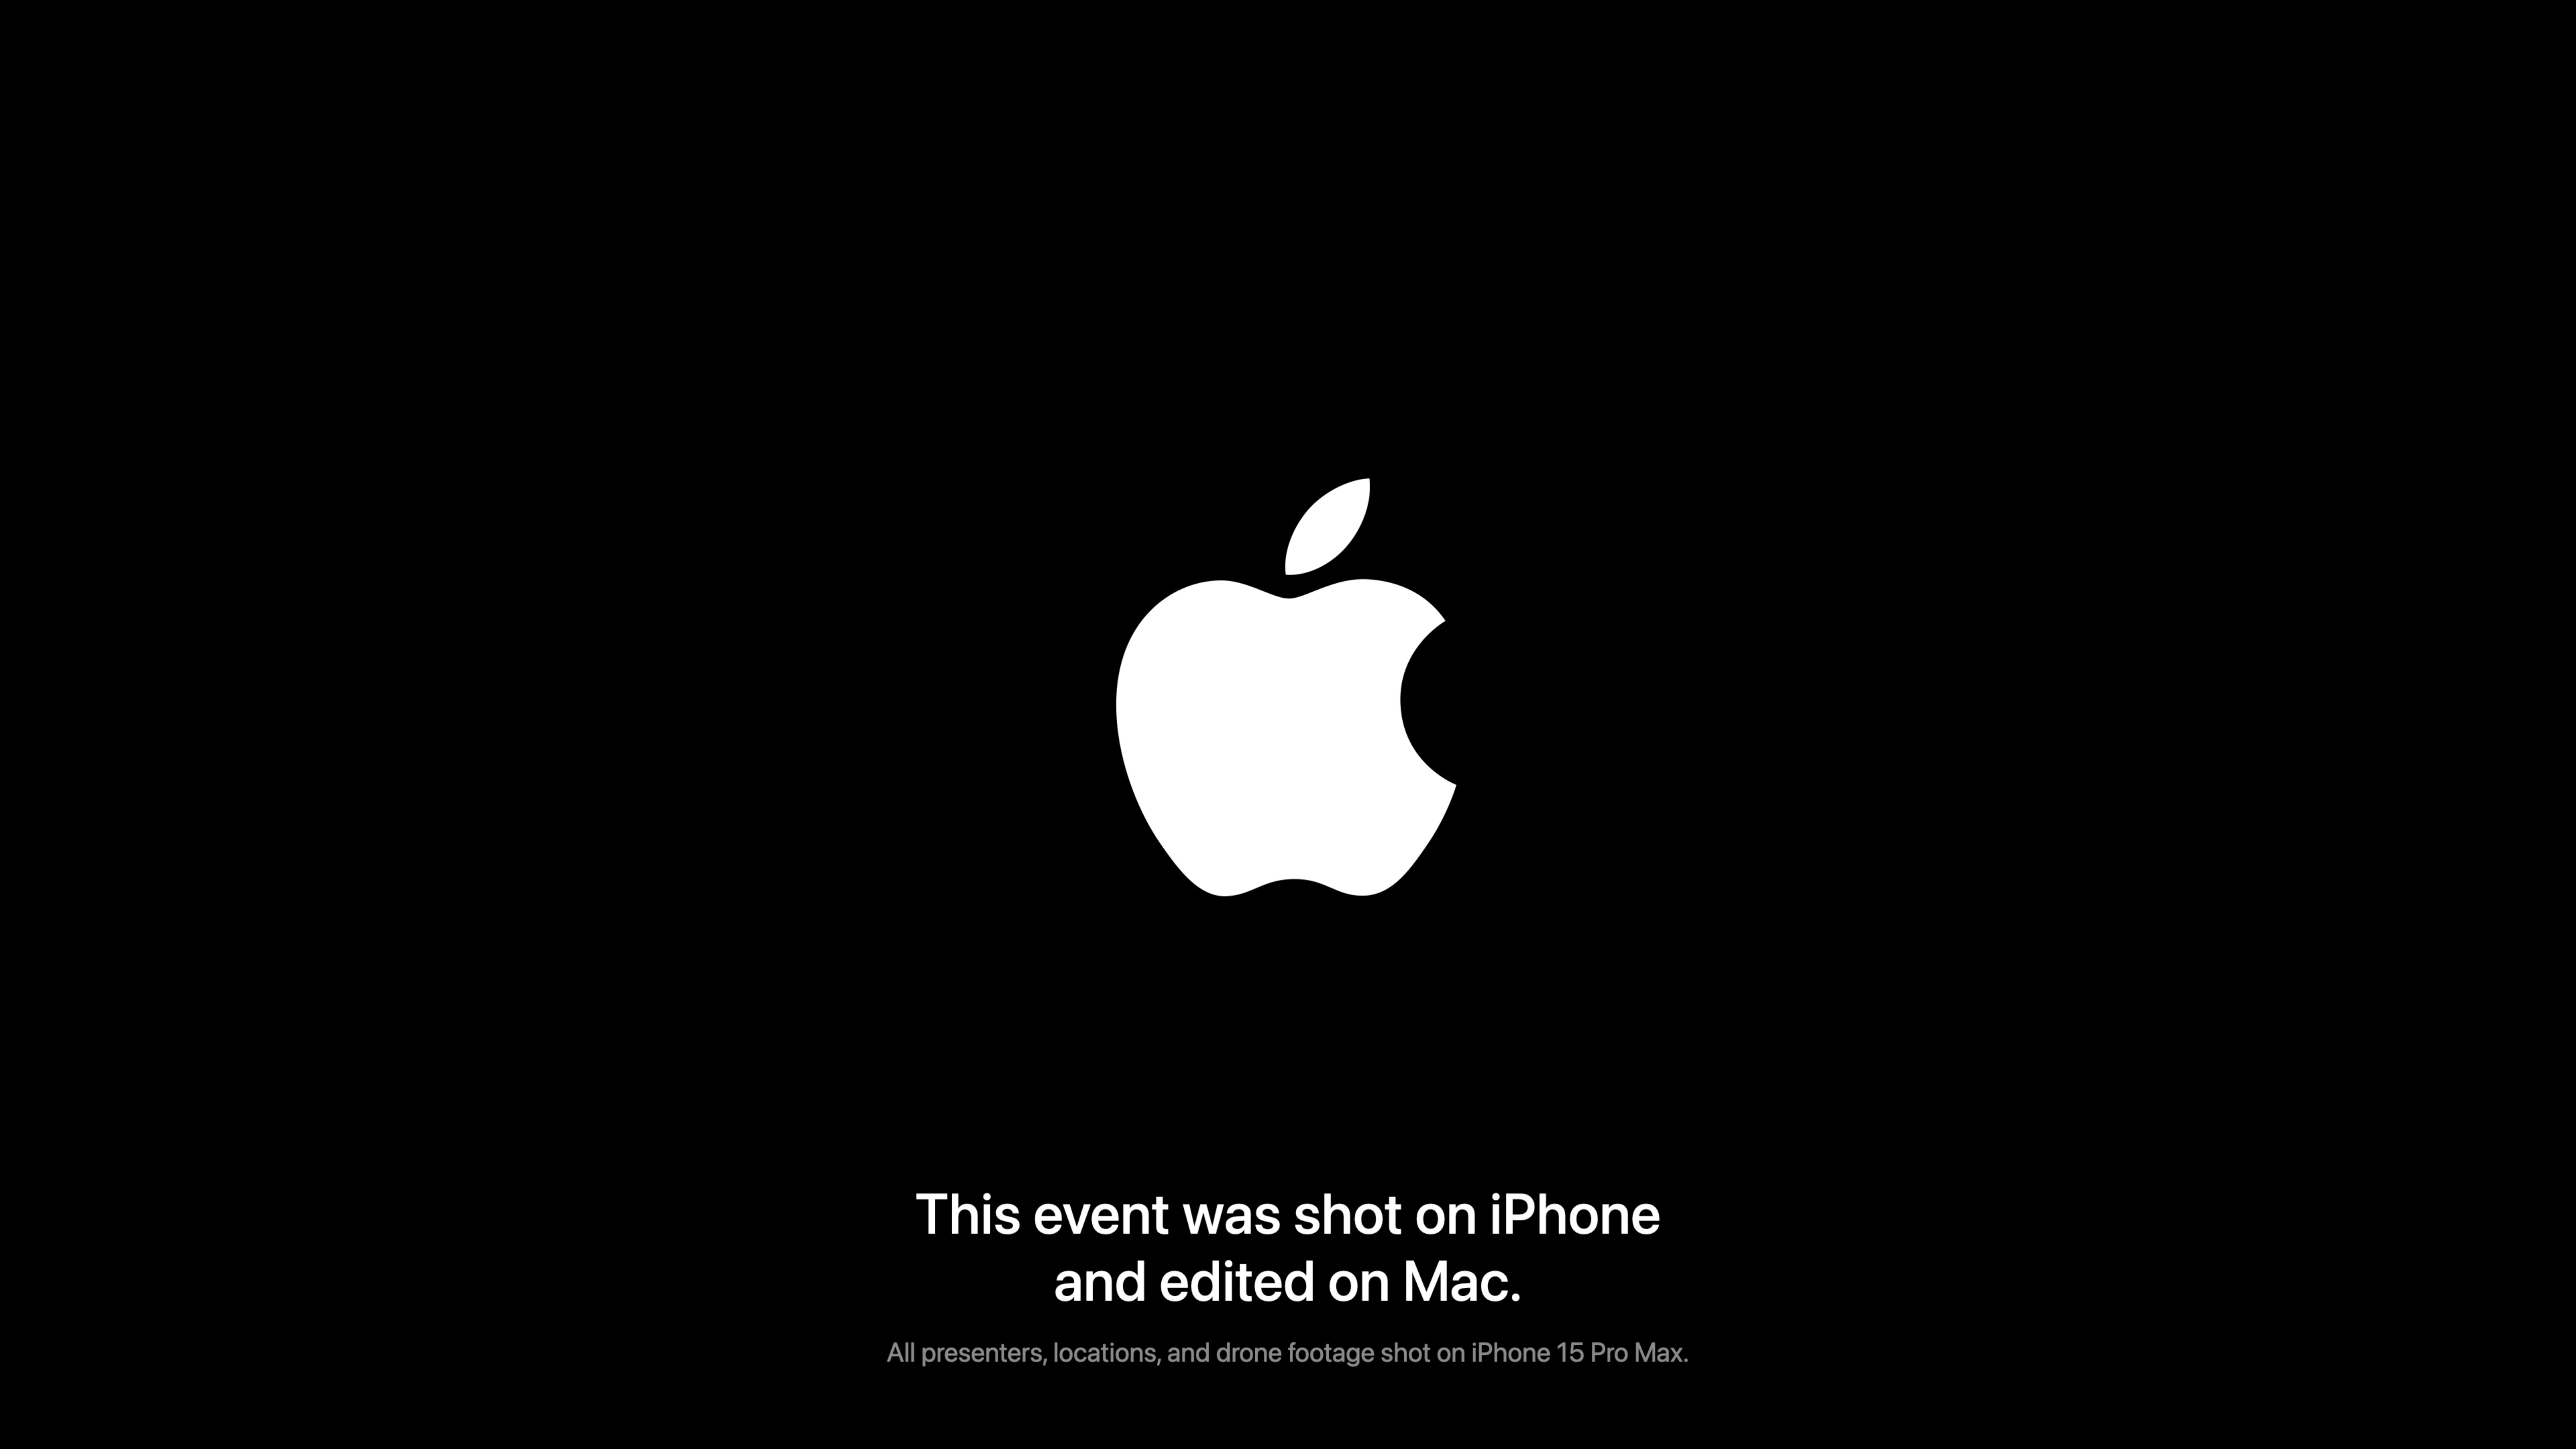 Apple's 'Scary Fast' Mac event was shot on iPhone 15 Pro Max